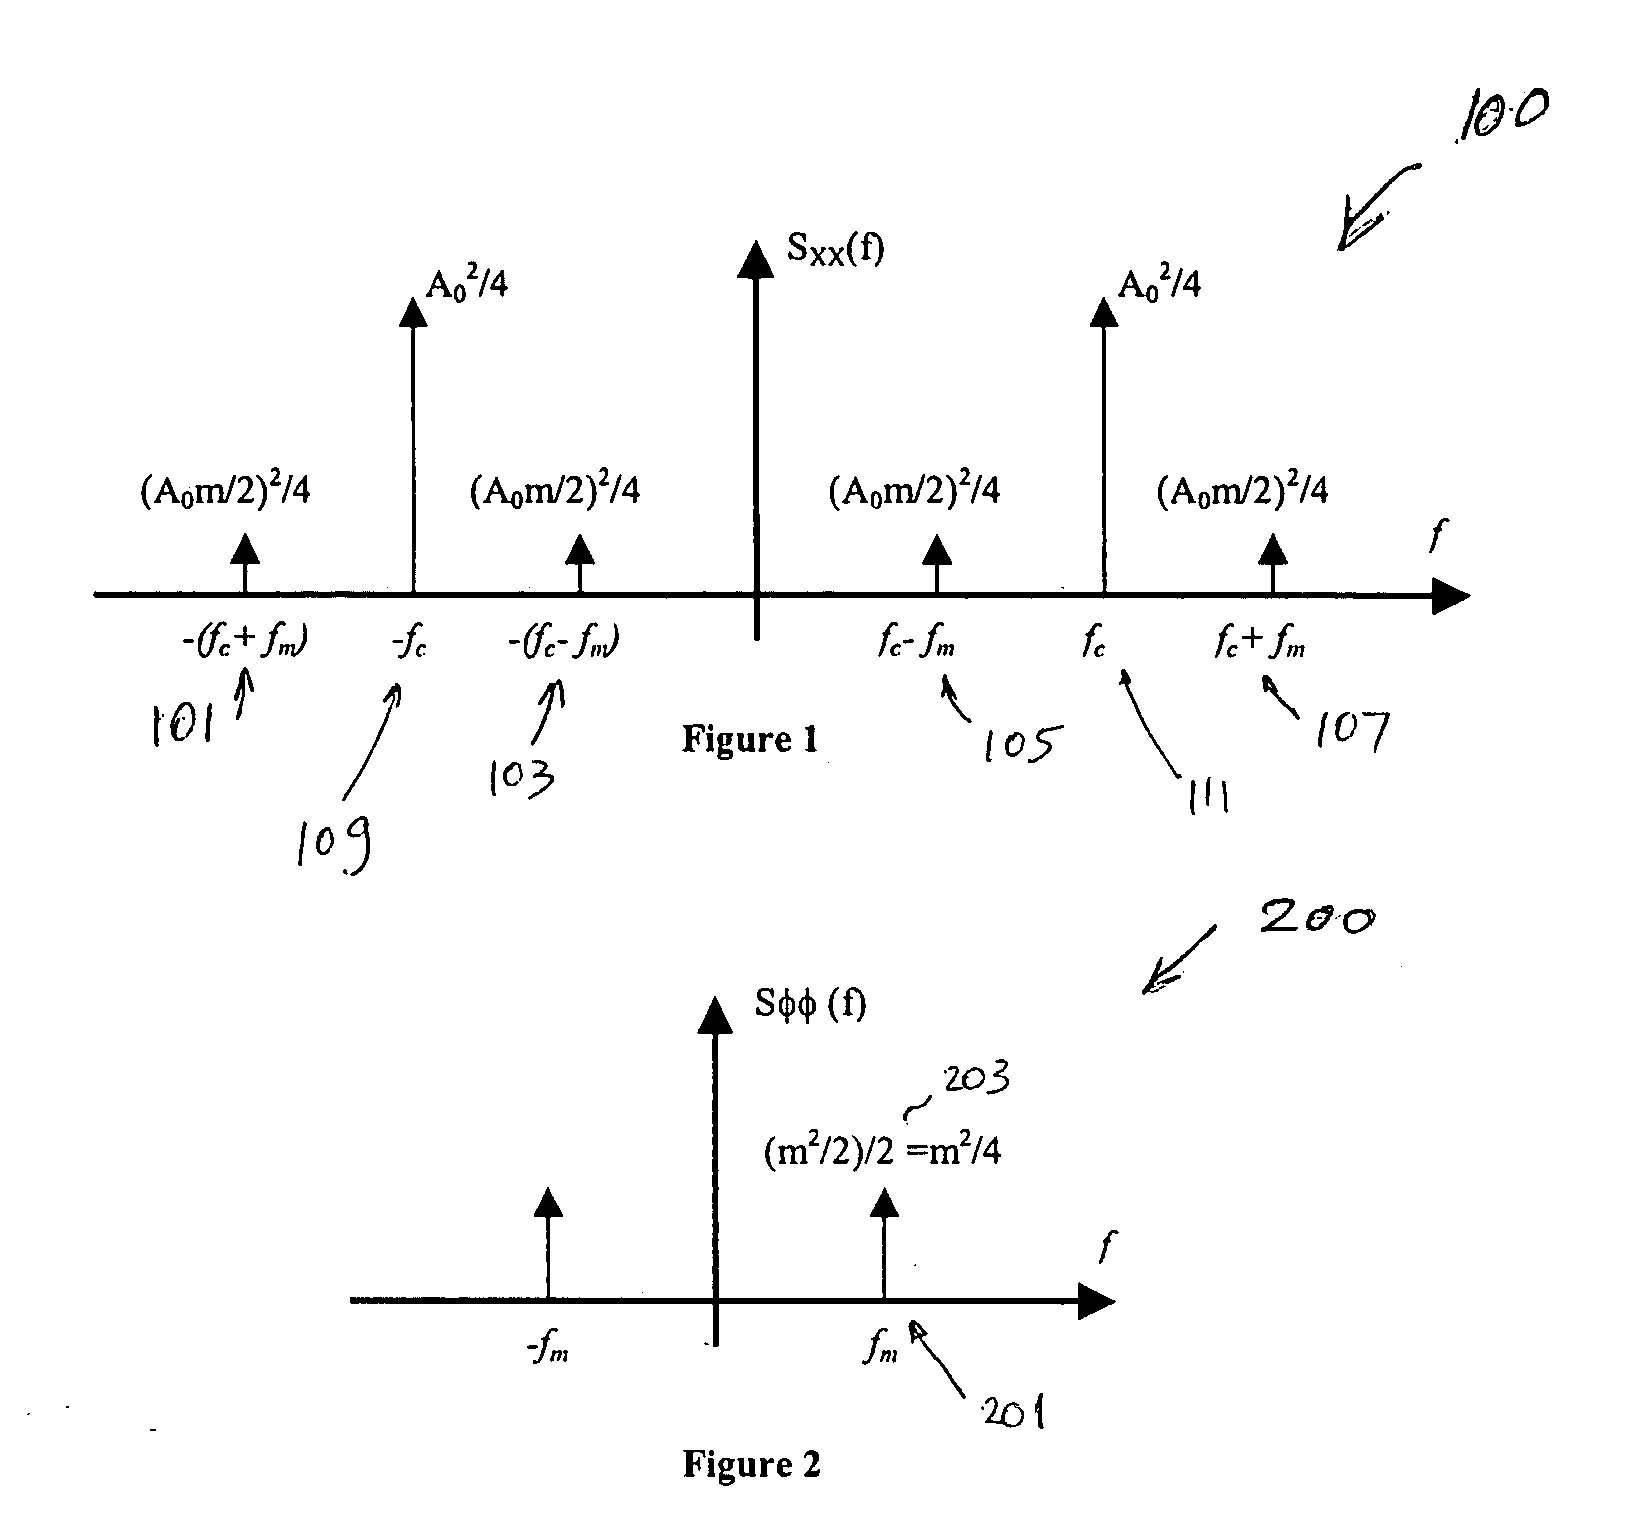 System and method for signal amplification